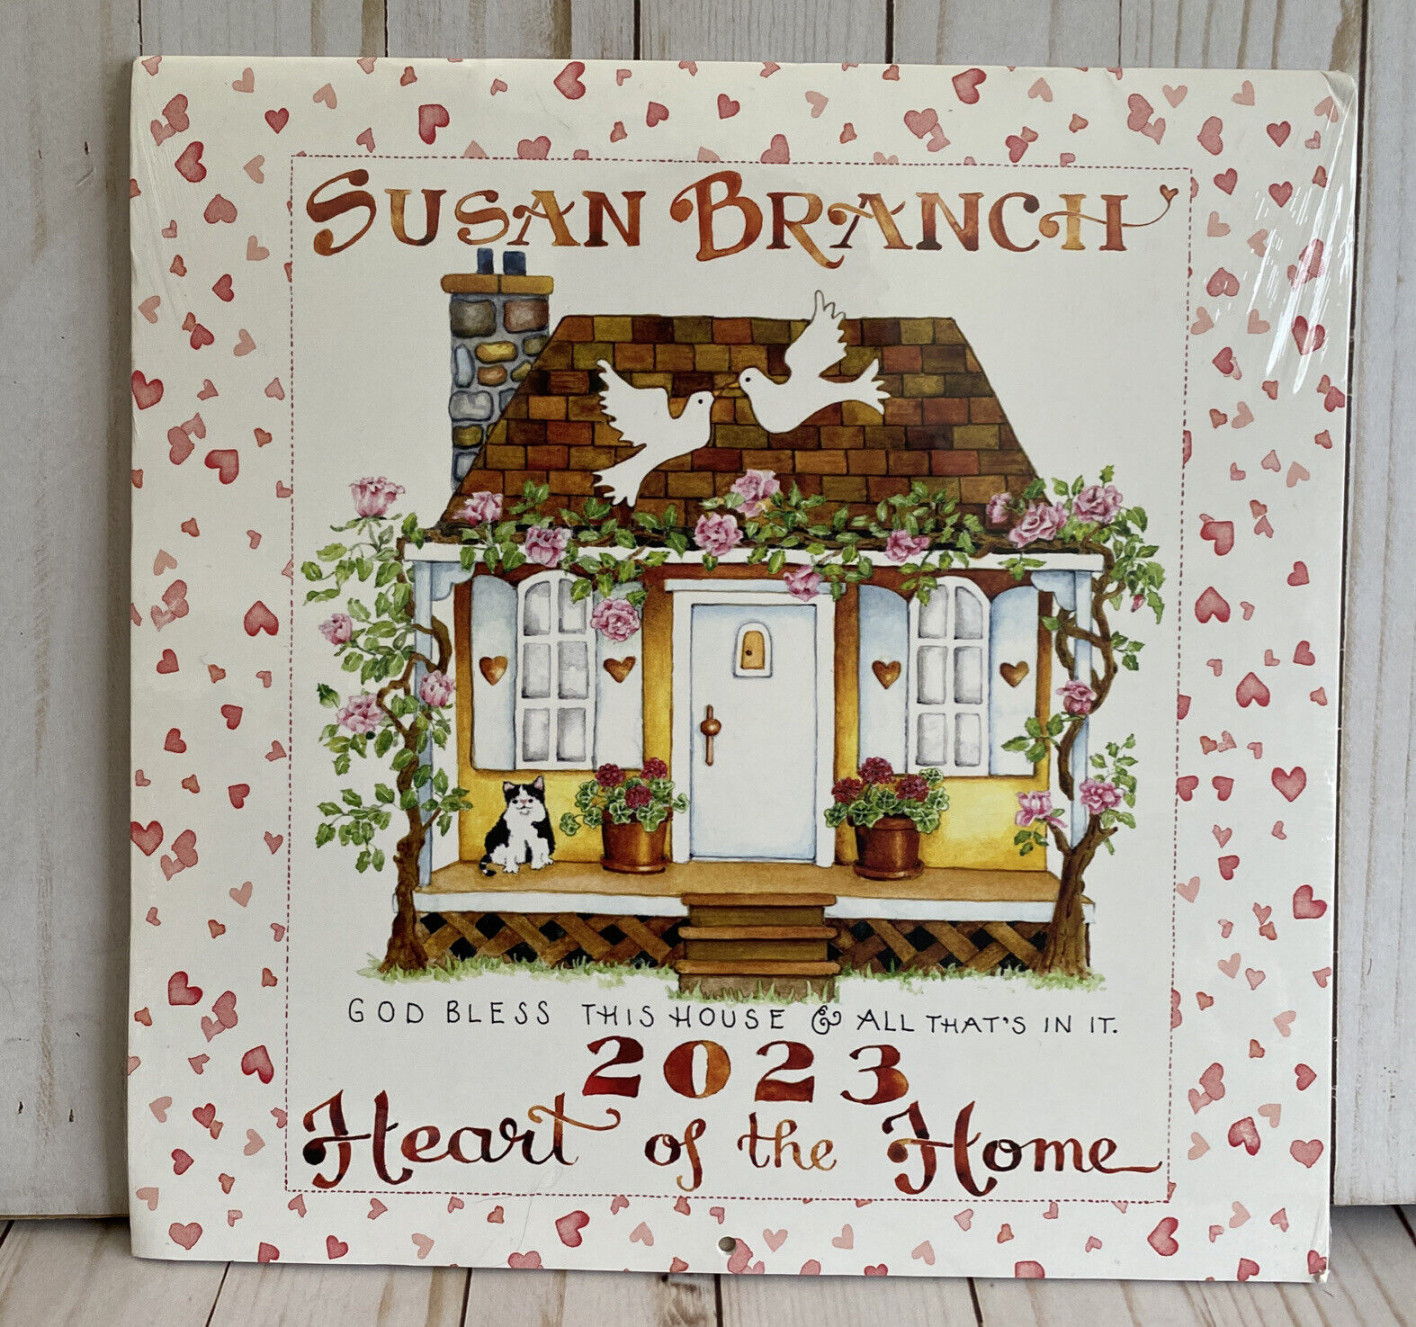 Susan Branch  Wall Calendar Heart of the Home God Bless This House  Sealed